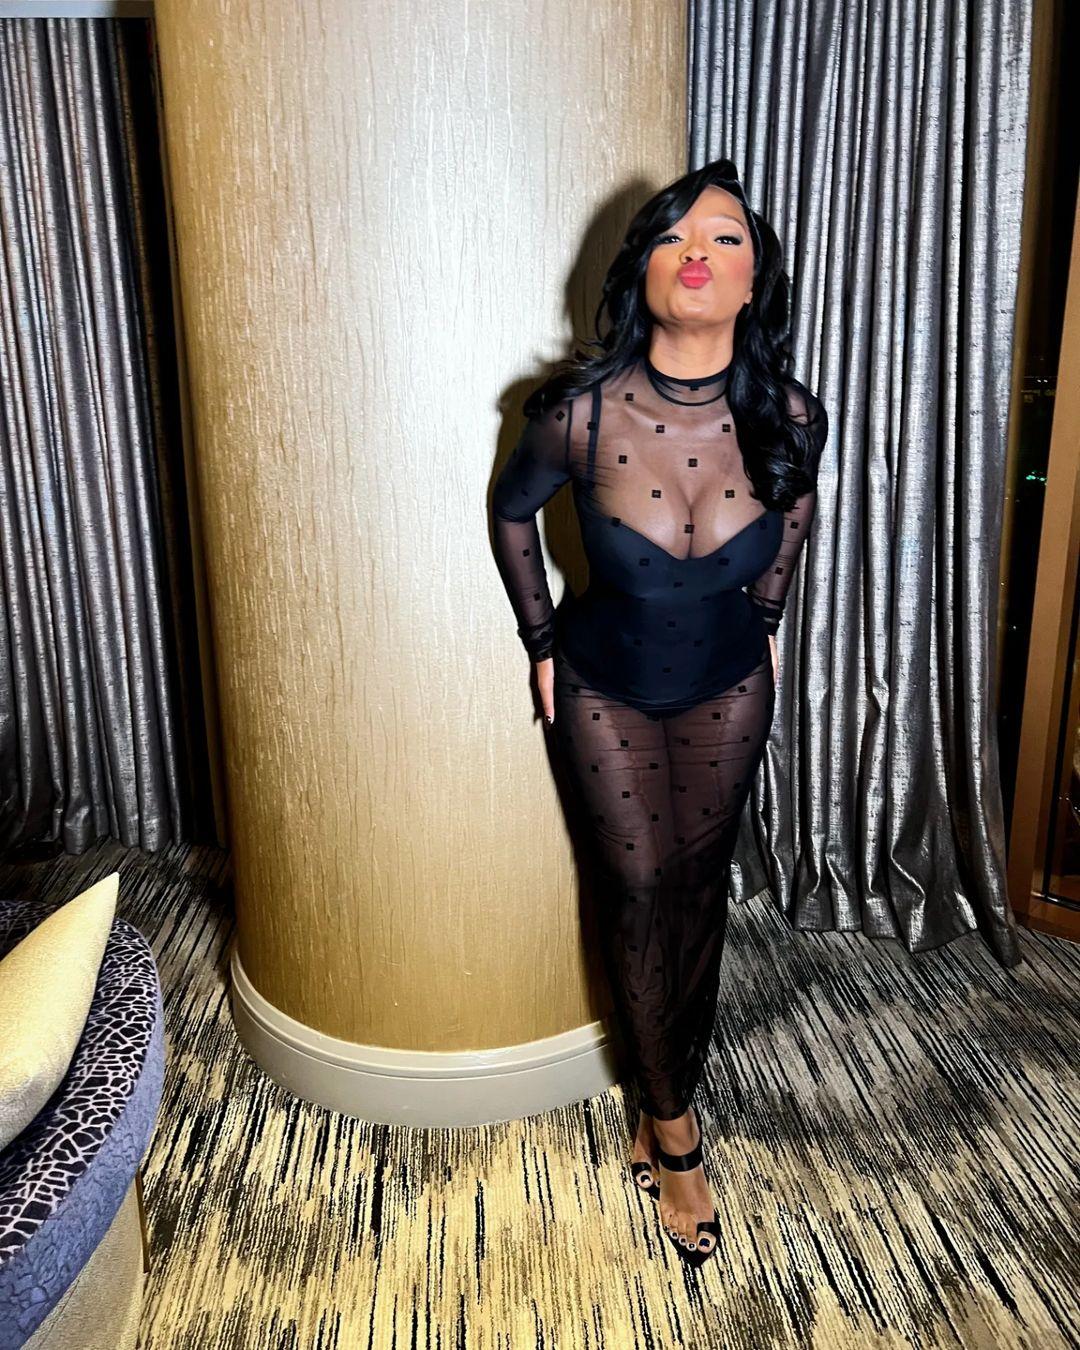 Keke Palmer attended Usher's Las Vegas residency in see-through outfit